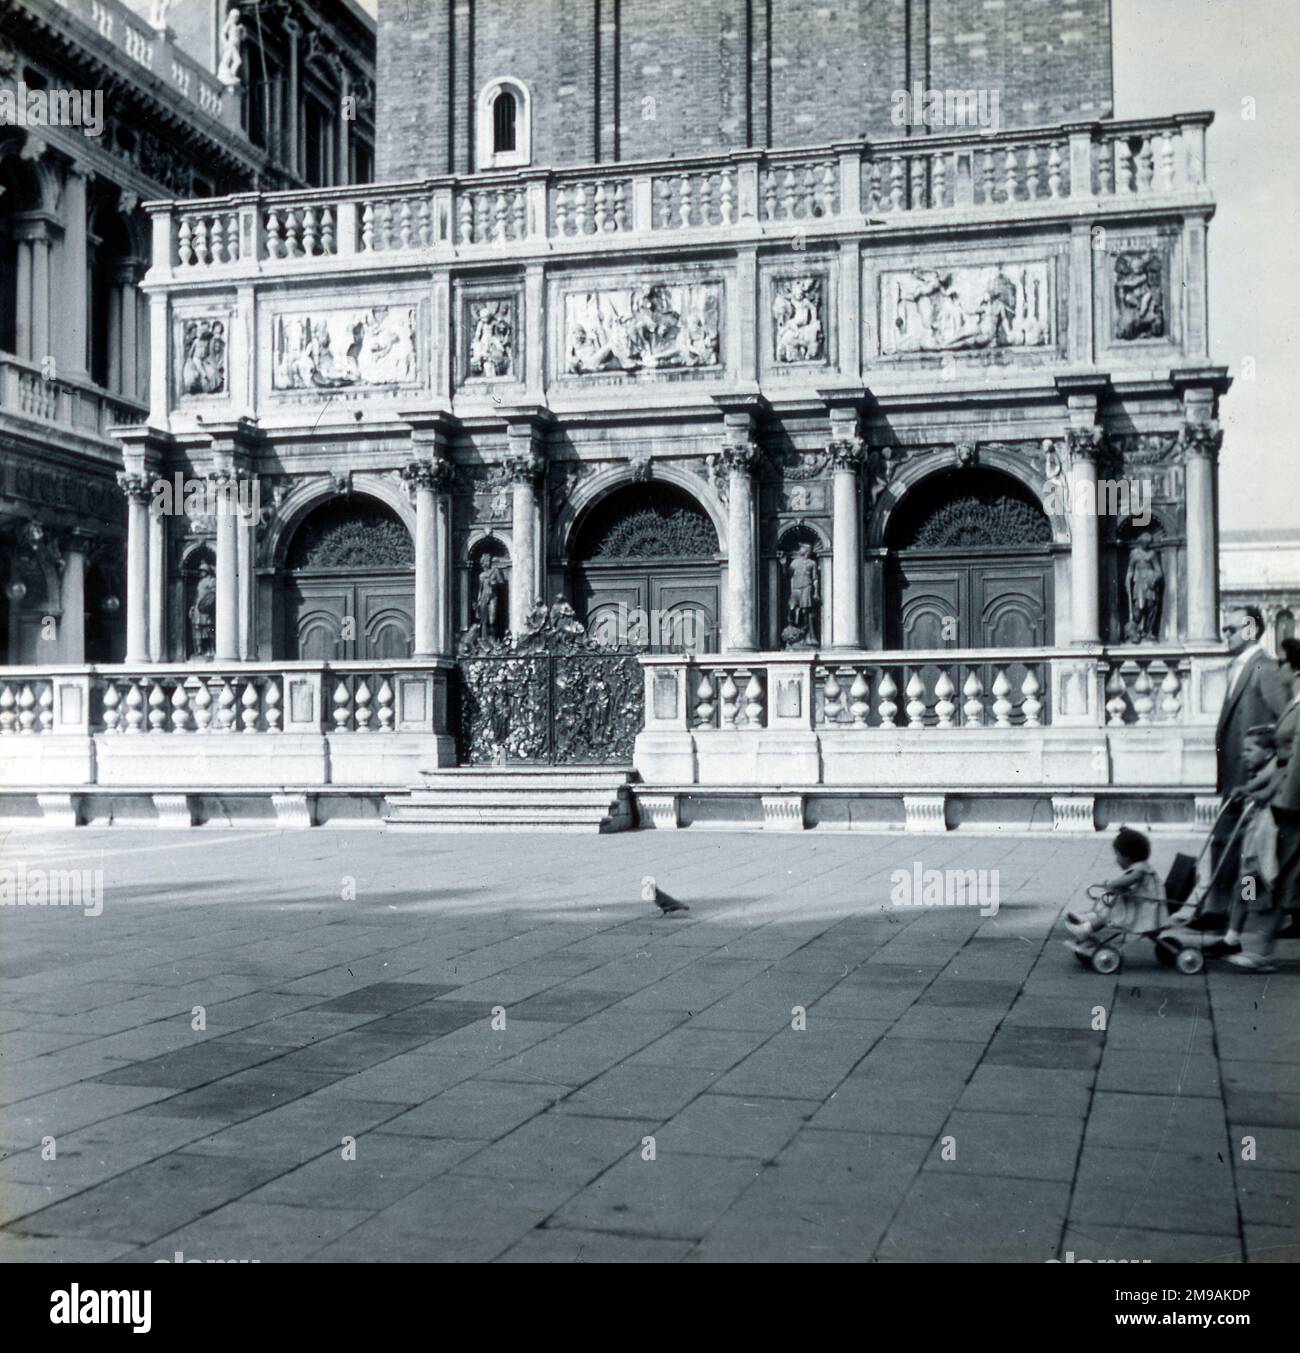 The base of the San Marco Campanile, St Mark's Square, Venice, Italy. Stock Photo